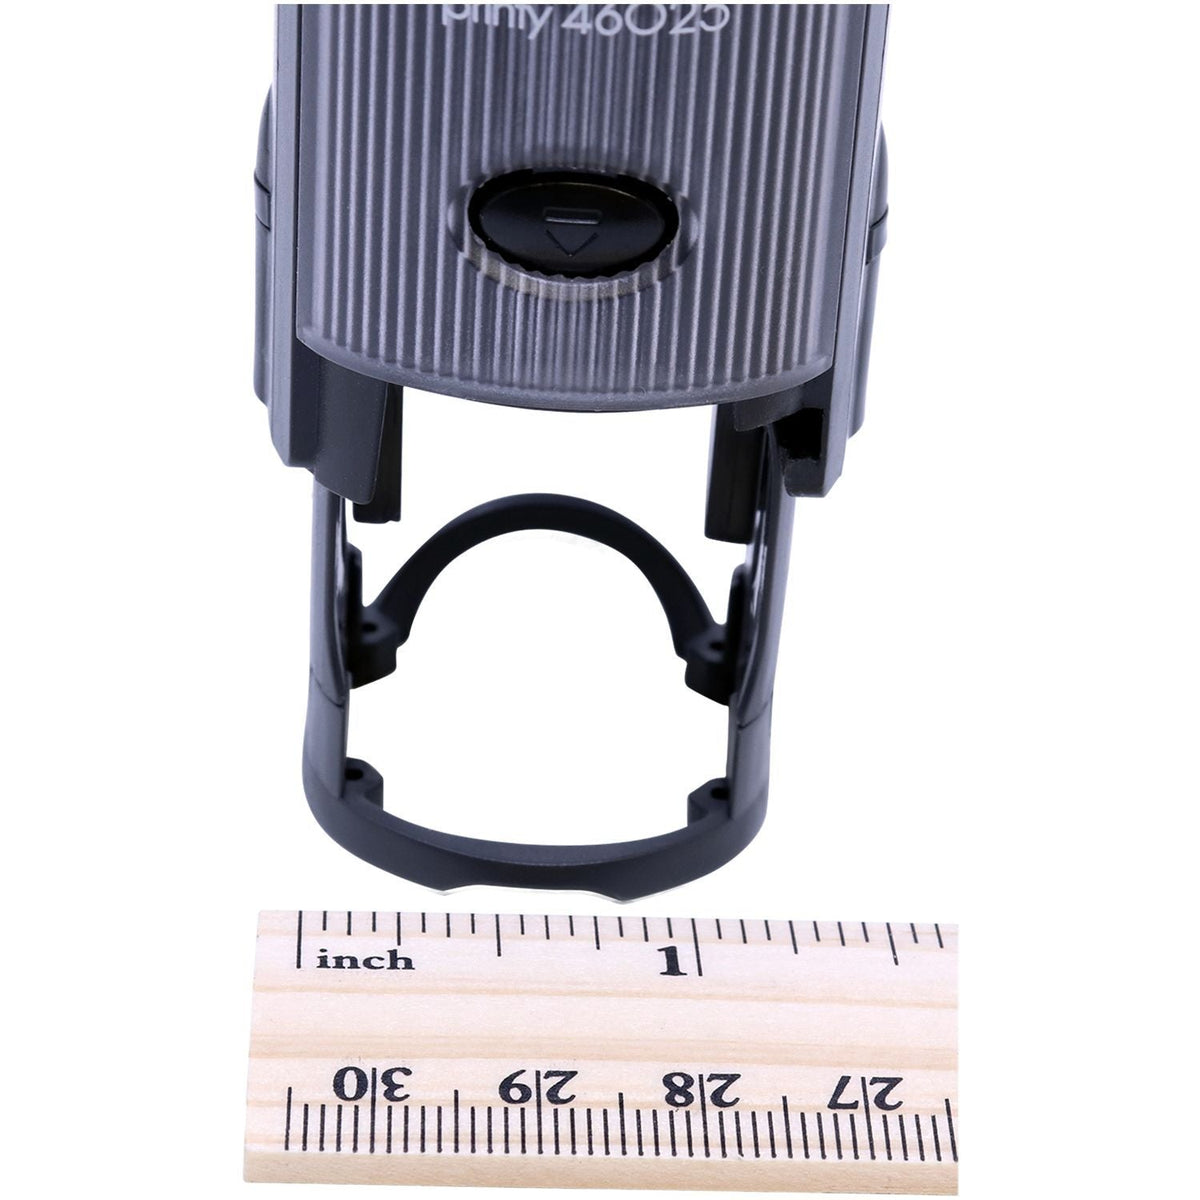 Measurment of Self-Inking Round Keep up the Good Work Stamp with Ruler